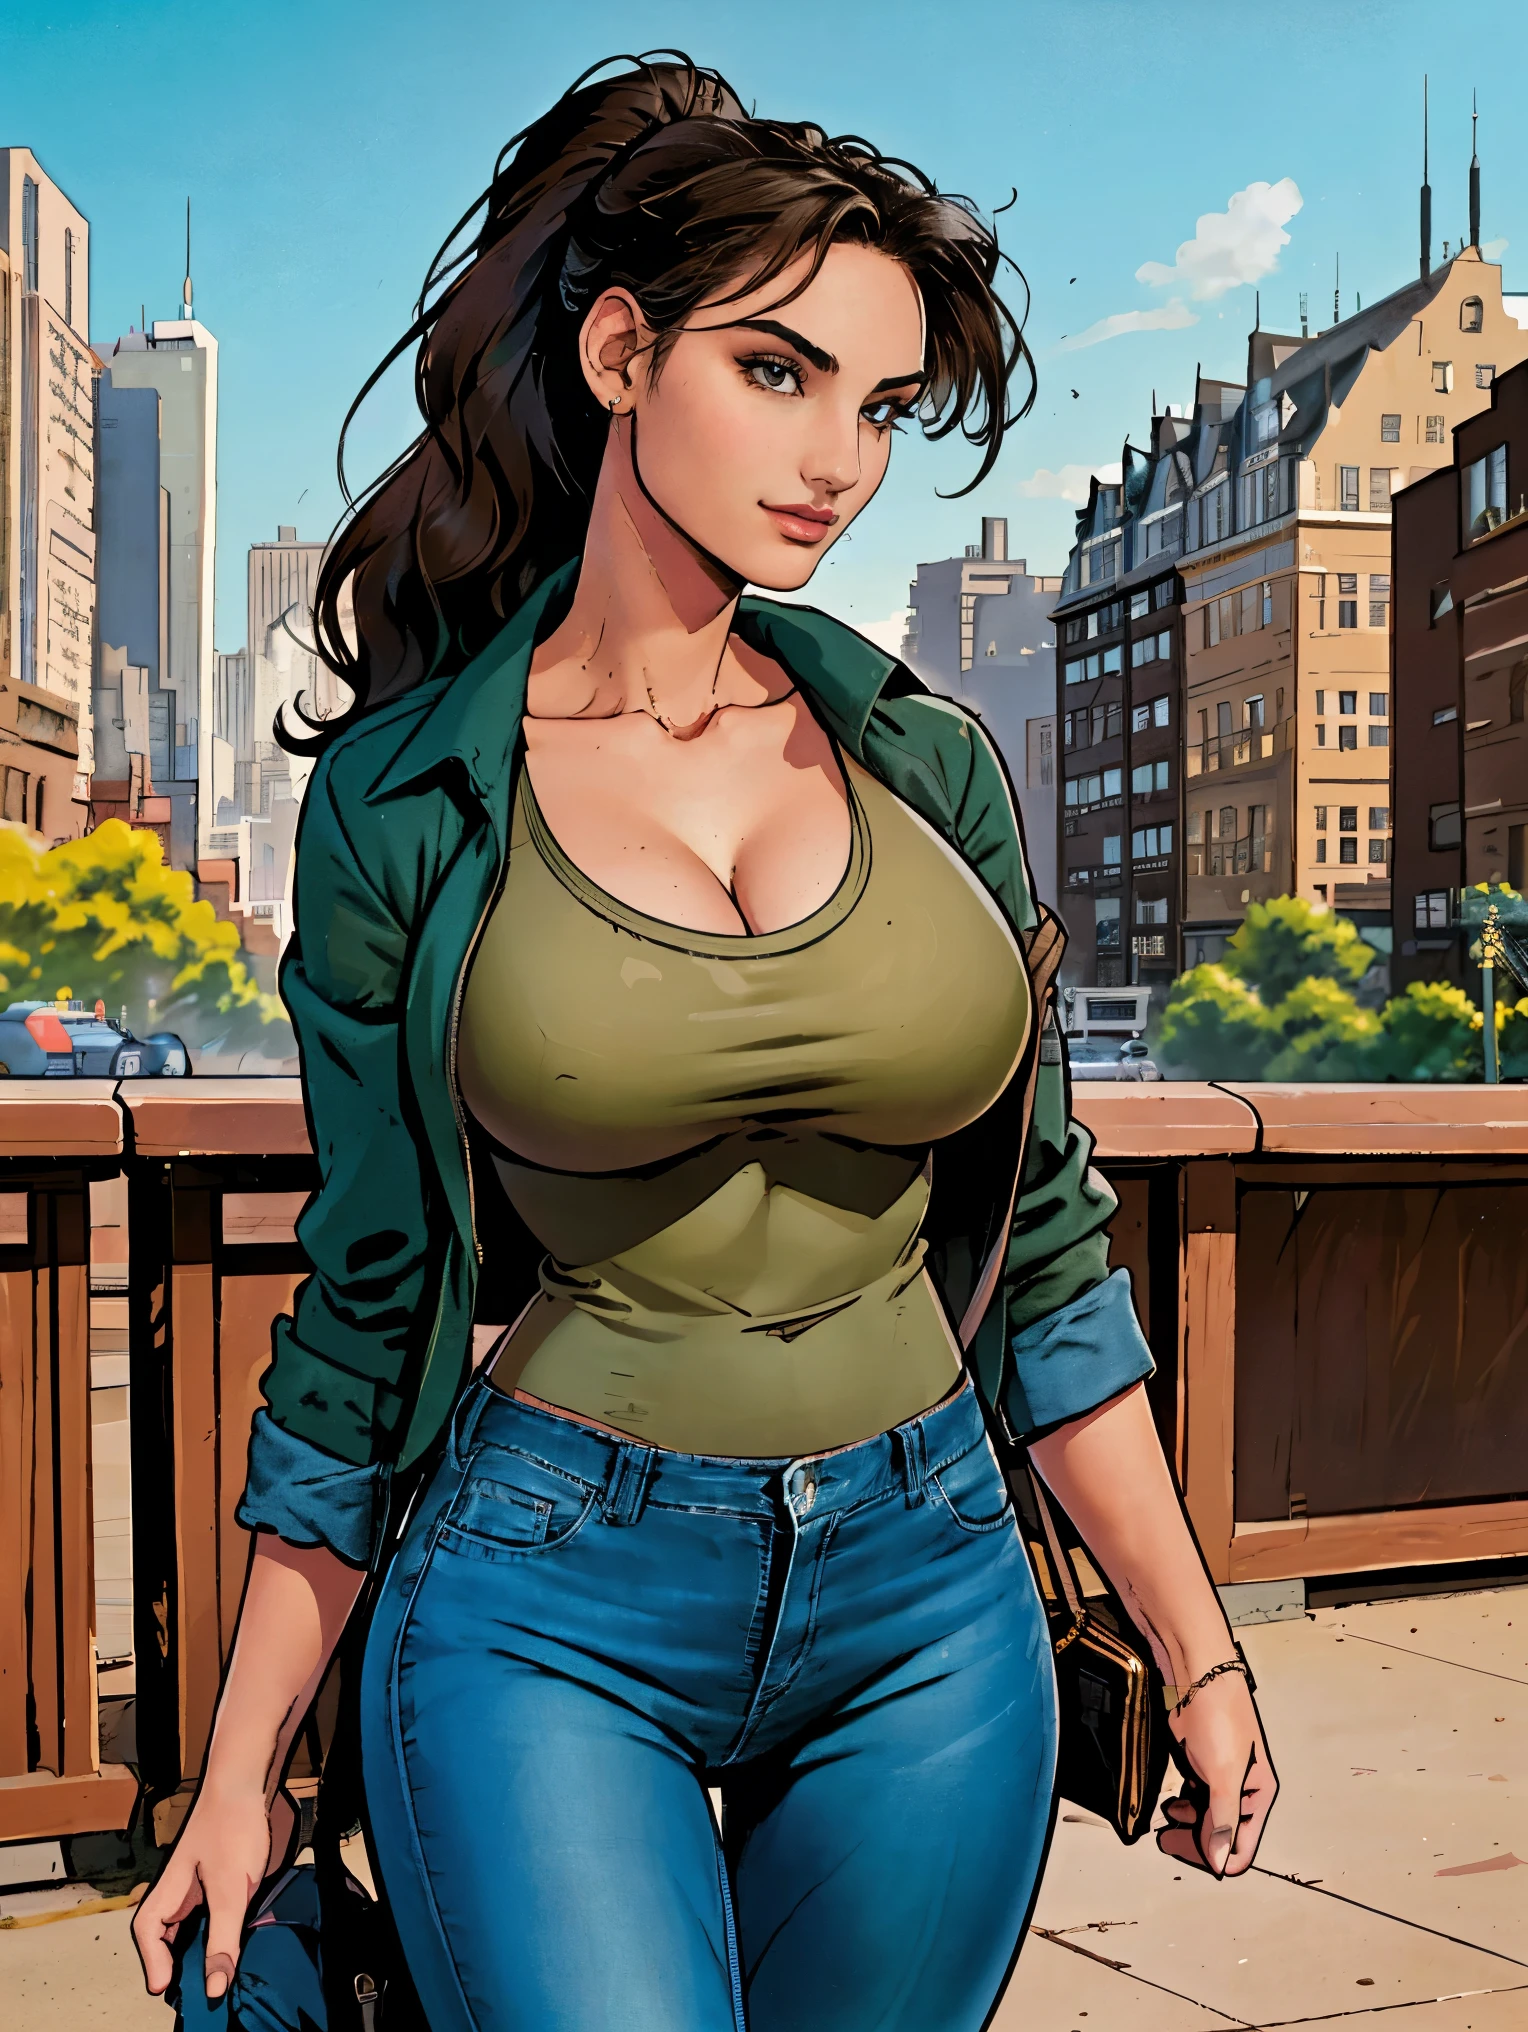 (masterpiece, top quality, best quality, official art, beautiful and aesthetic:1.2), (1girl:1.3), dark brown hair pulled back, elegant updo, extremely detailed, portrait, looking at viewer, facing viewer, solo, (full body:0.6), detailed background, close up, kindly eyes, (warm summer park theme:1.1), busty woman, charlatan, smirk, mysterious, long hair, huge ponytail, slim, thin, athletic, womanly, elastic woman, dark green jacket, tank top, blue jeans, hair bandana, camera bag, brunette, city, heroic, cheerful, city exterior, park, street, daylight, soft lighting, natural lighting, athletic, strong, slim waist, slim hips, long legs, muscular legs, modern (city park exterior:1.1) background, bright mysterious lighting, shadows, magical atmosphere, dutch angle, (Abigail Shapiro)